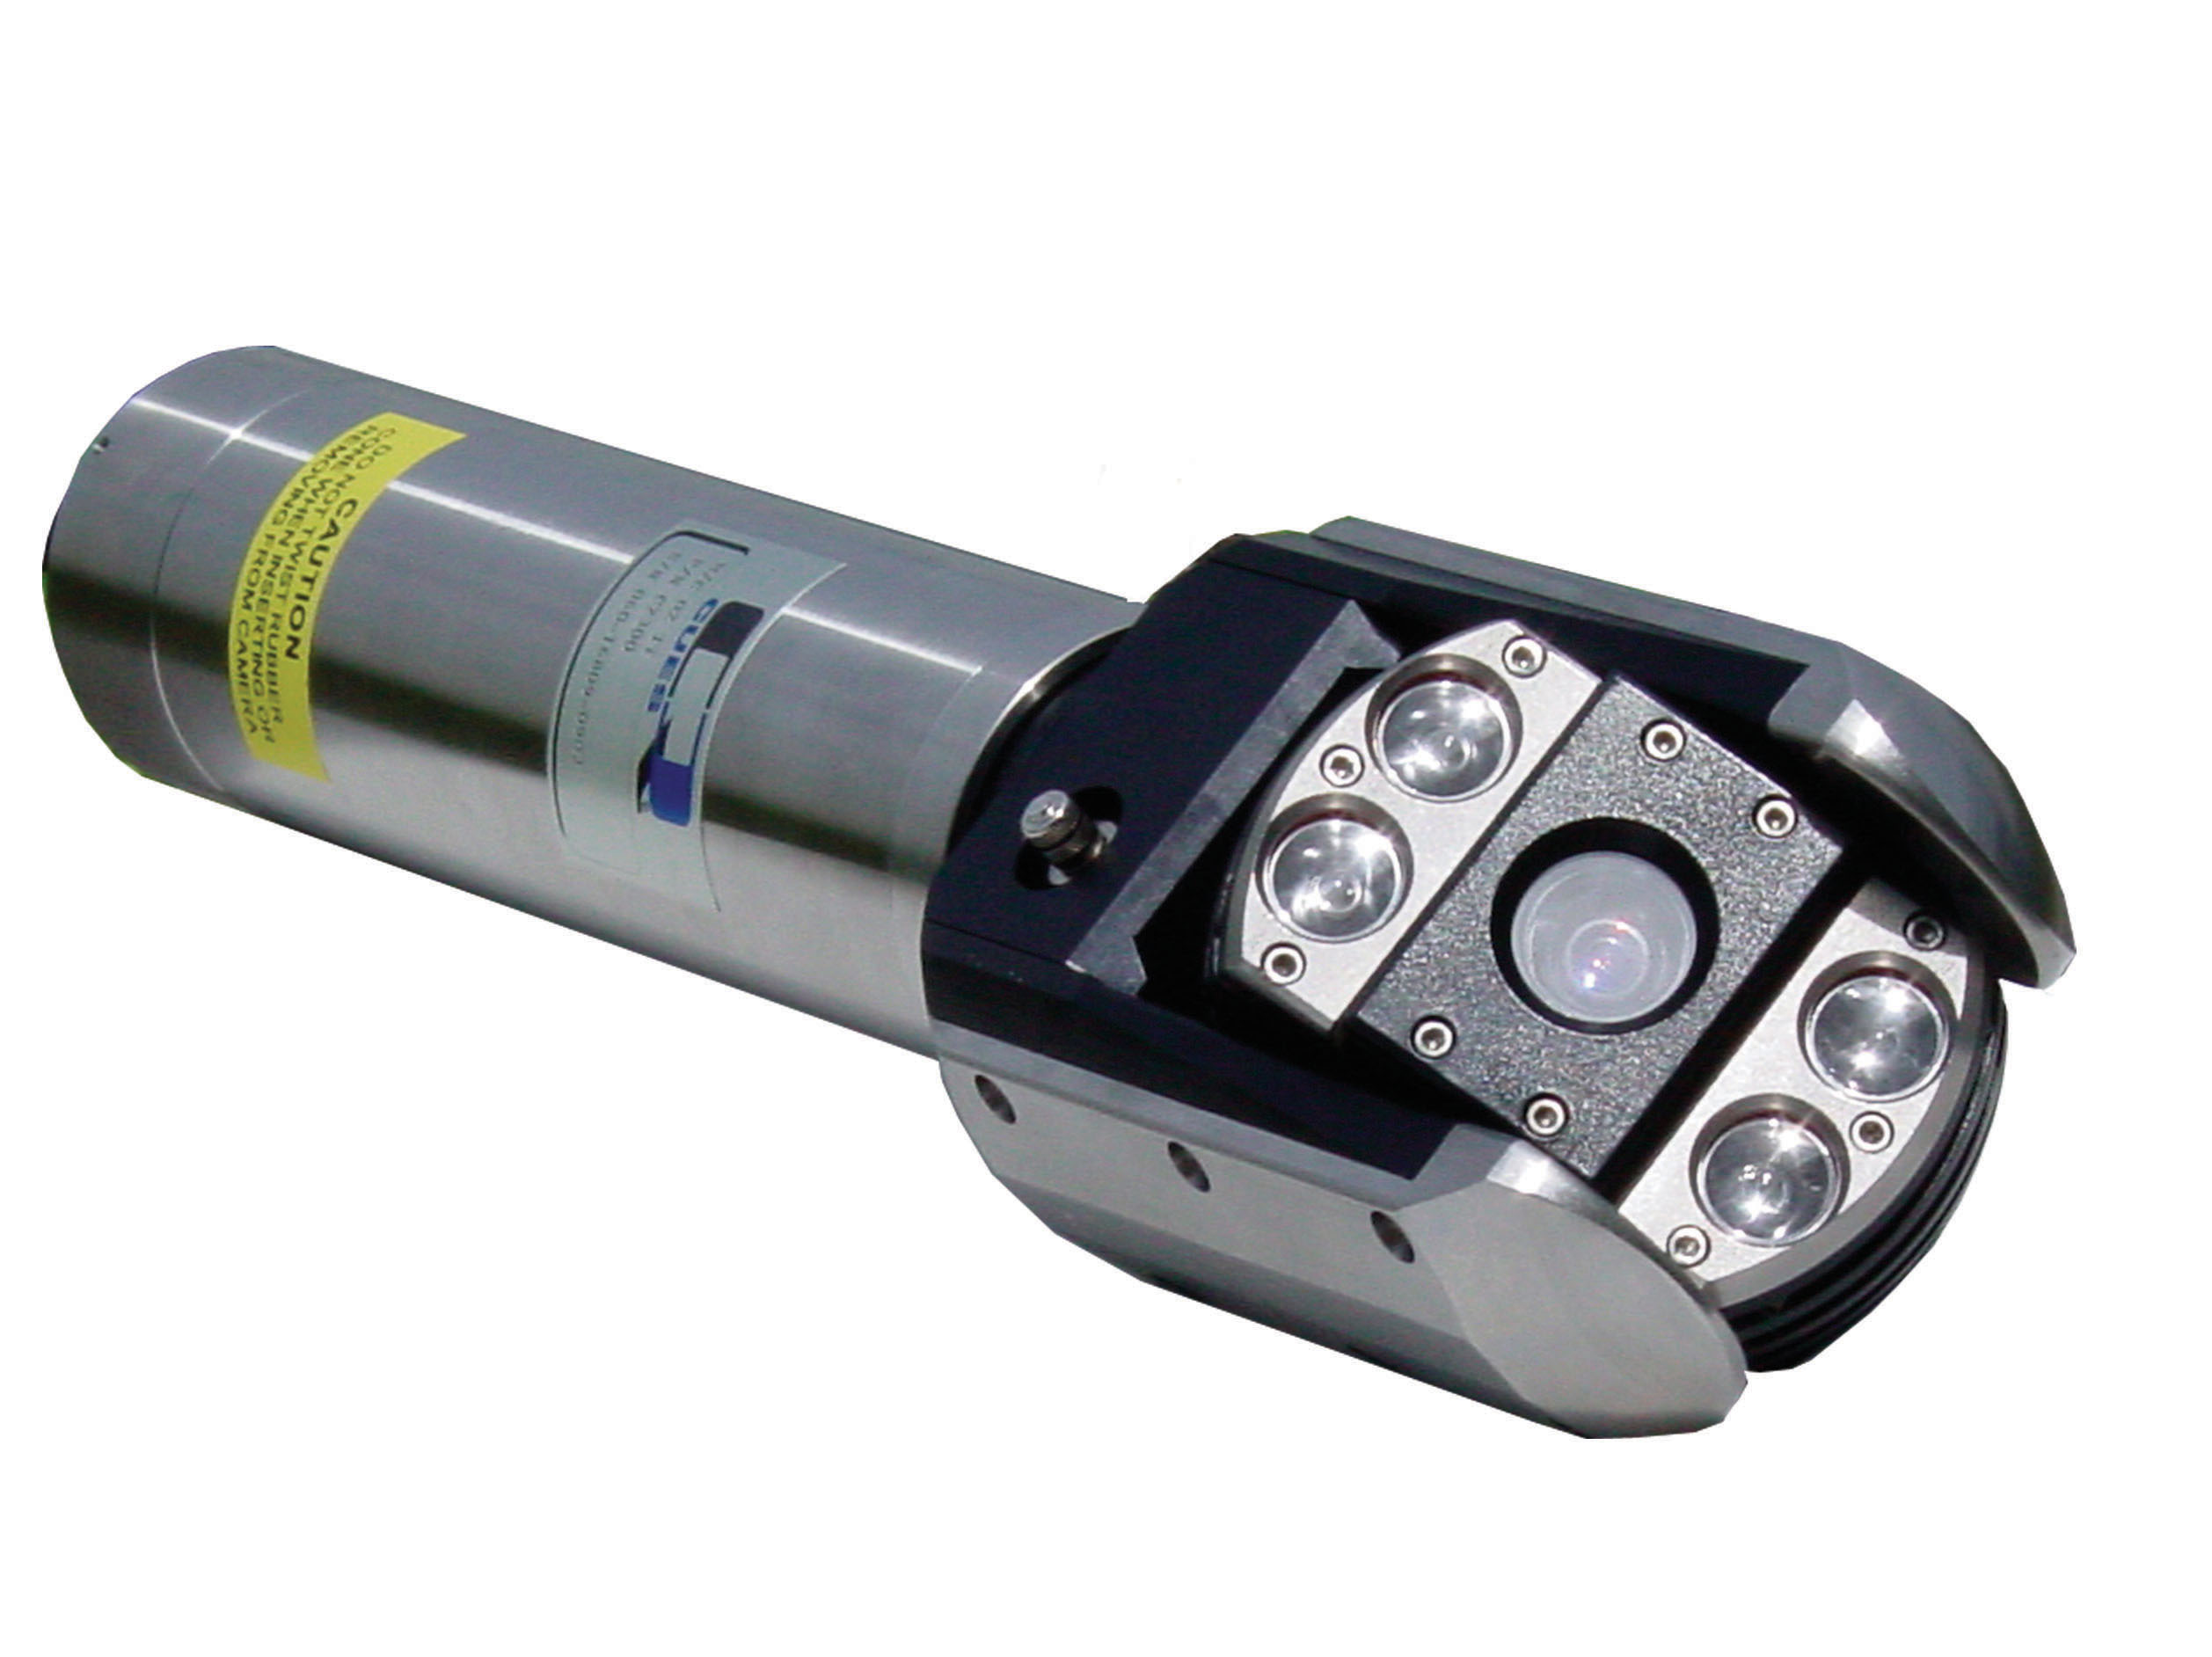 The OZIII camera include an optional sonde to accurately locate the camera in metallic and non-metallic pipes! An optional inclinometer is also available for inclination surveys.